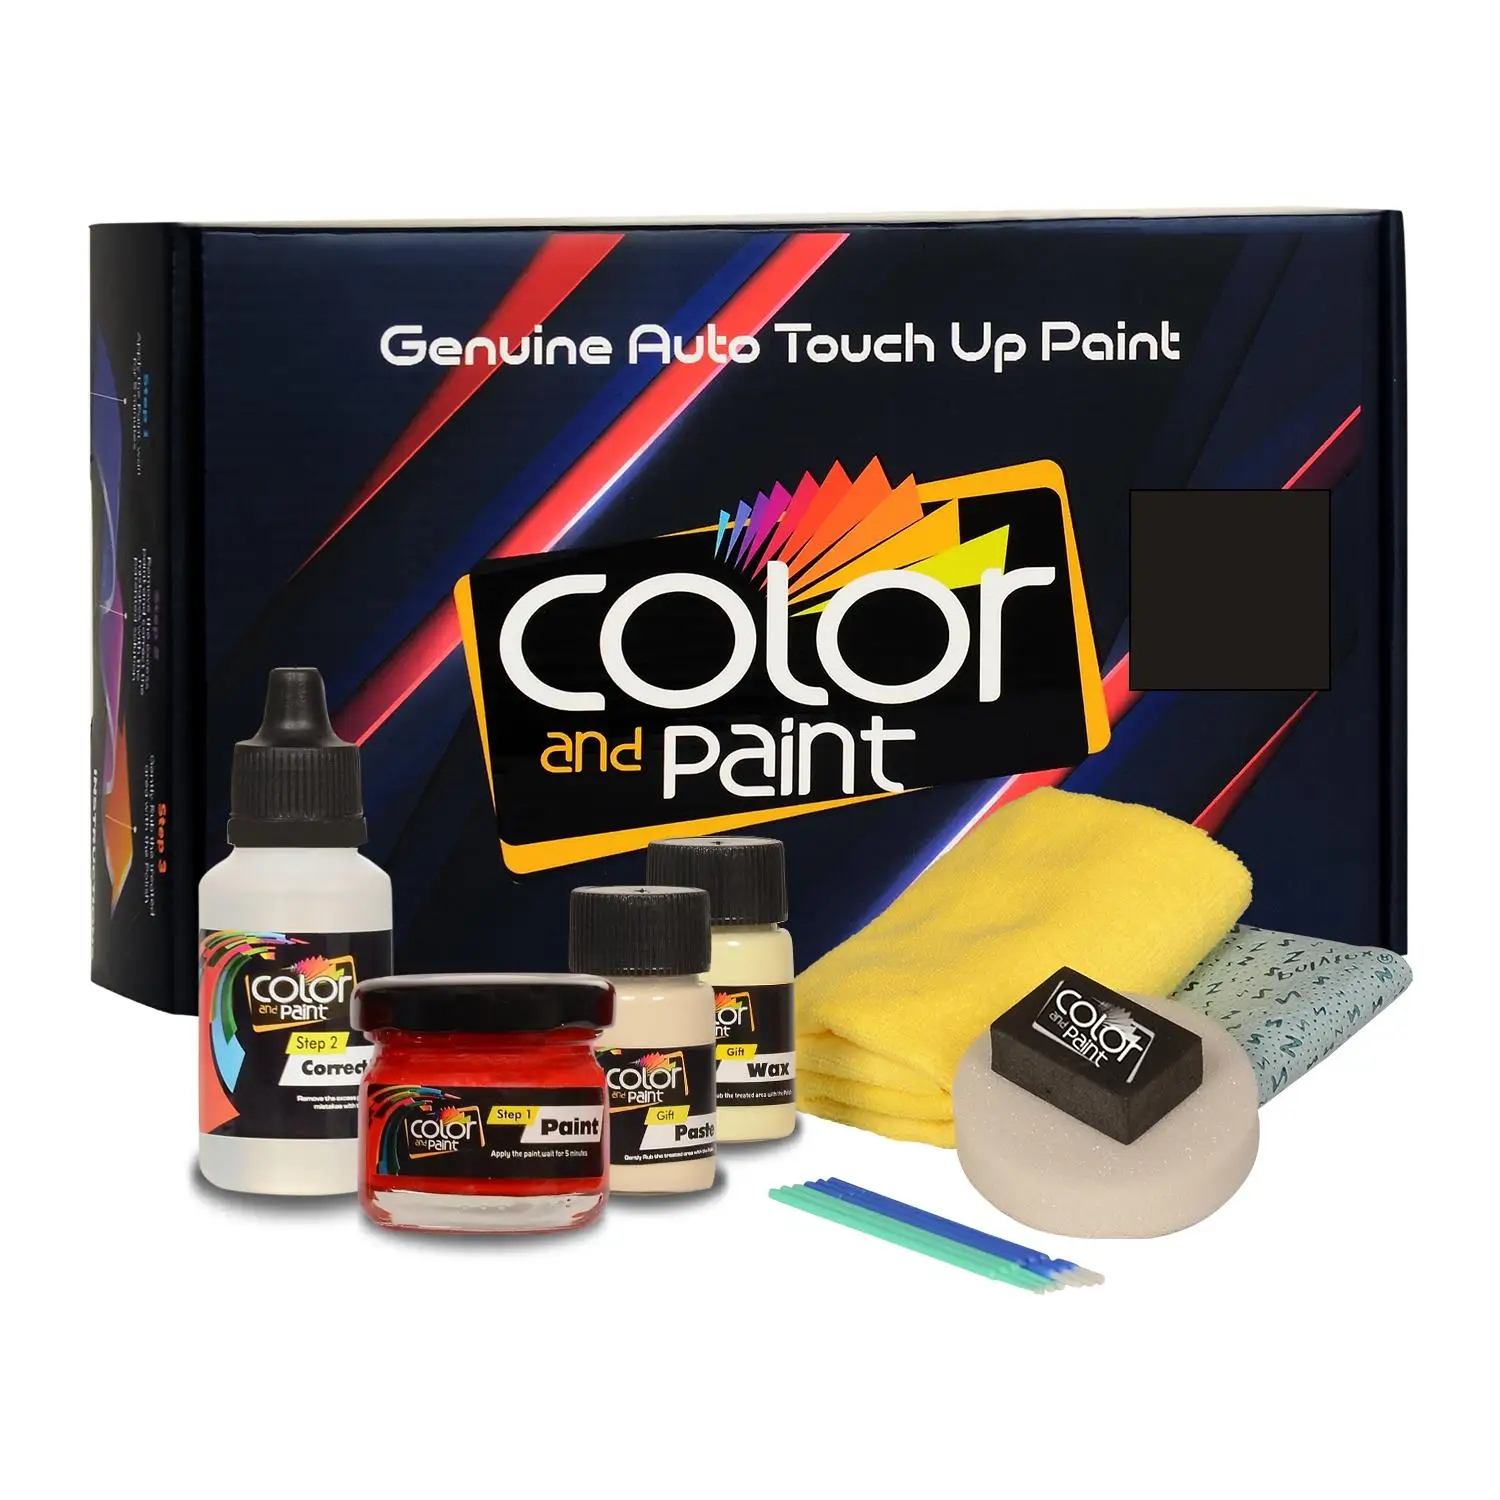 

Color and Paint compatible with Chevrolet Automotive Touch Up Paint - MEDIUM DARK NEUTRAL SEMI-GLOSS-WA9648-basic Care